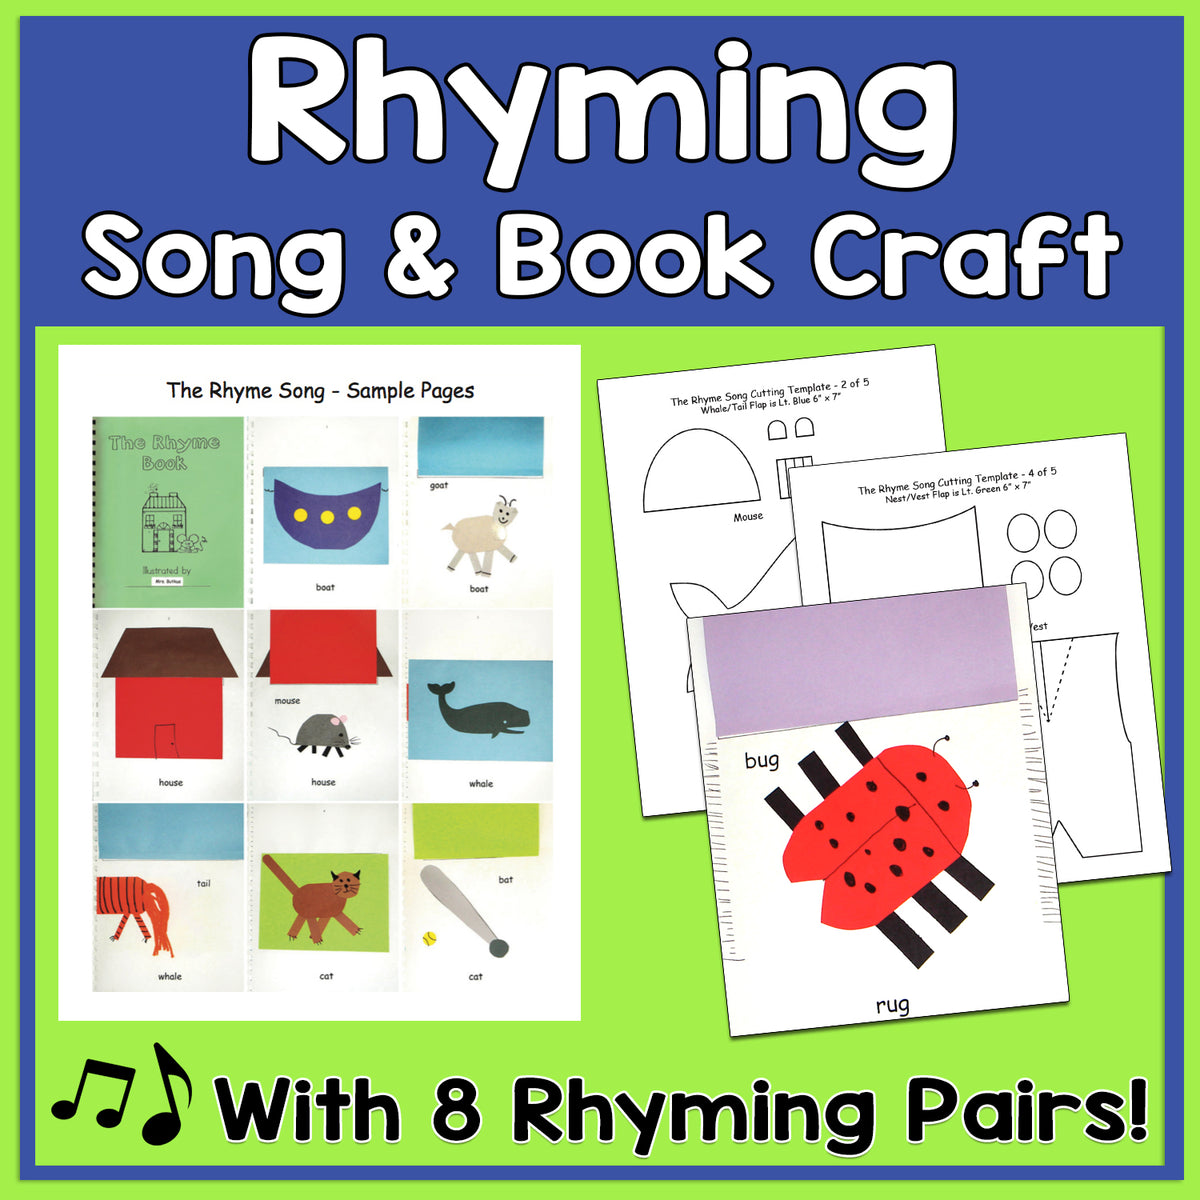 The Rhyme Song & Book Craft